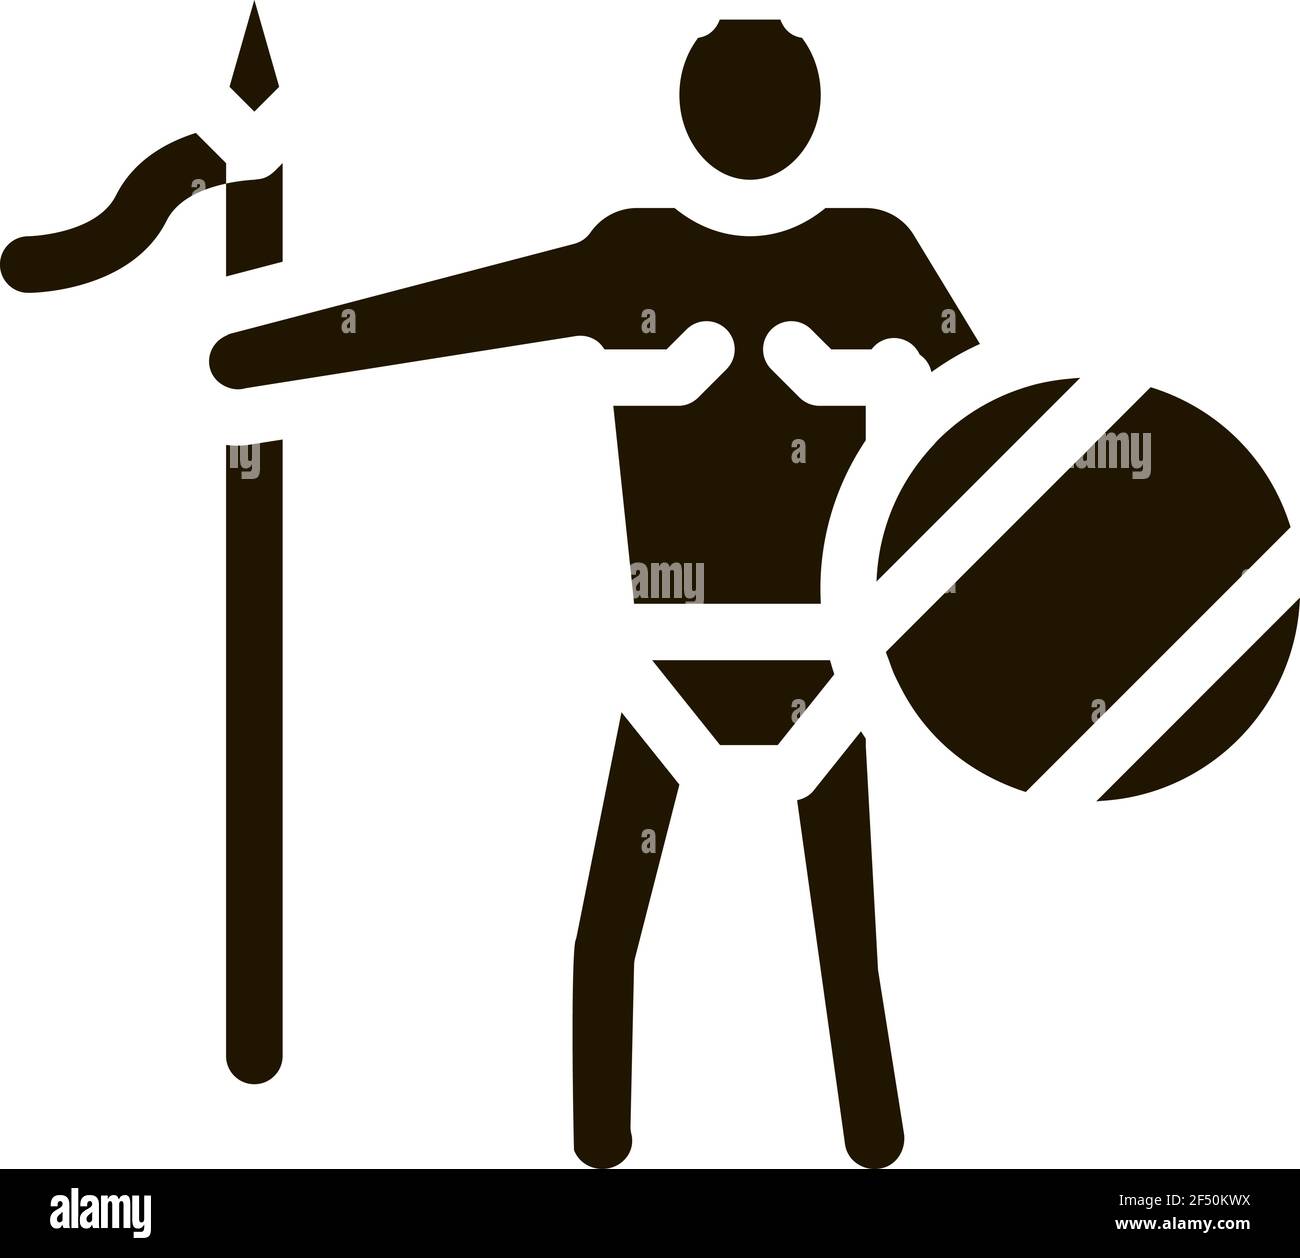 Aztec with Spear and Shield Illustration Stock Vector